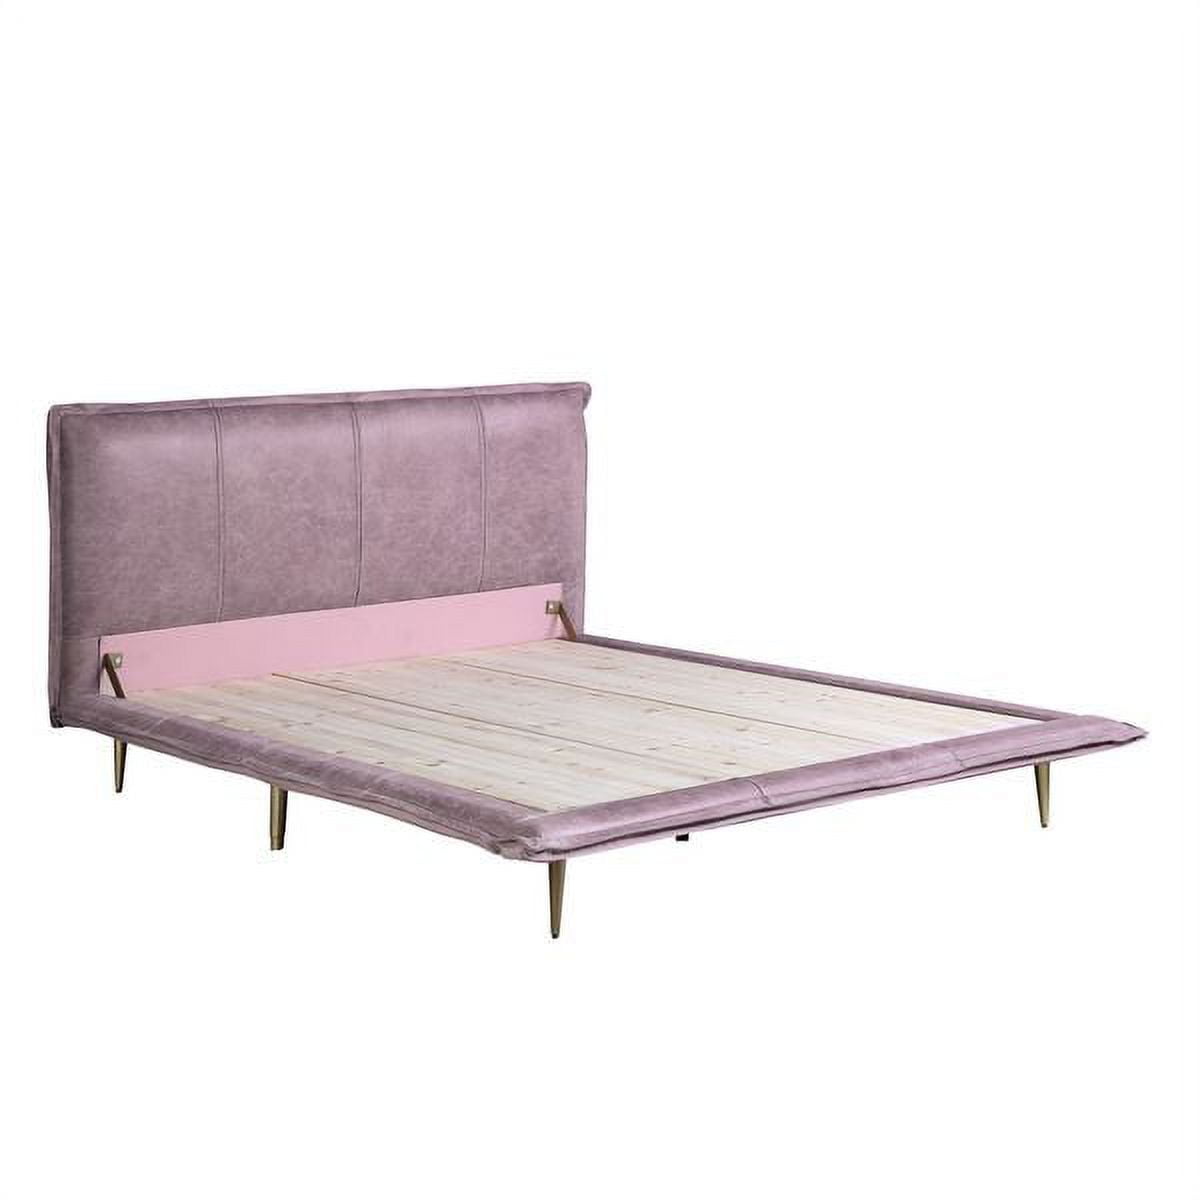 Picture of Acme Furniture BD00560EK 90 x 90 x 41 in. Metis Eastern Bed, Pink Top Grain Leather - King Size